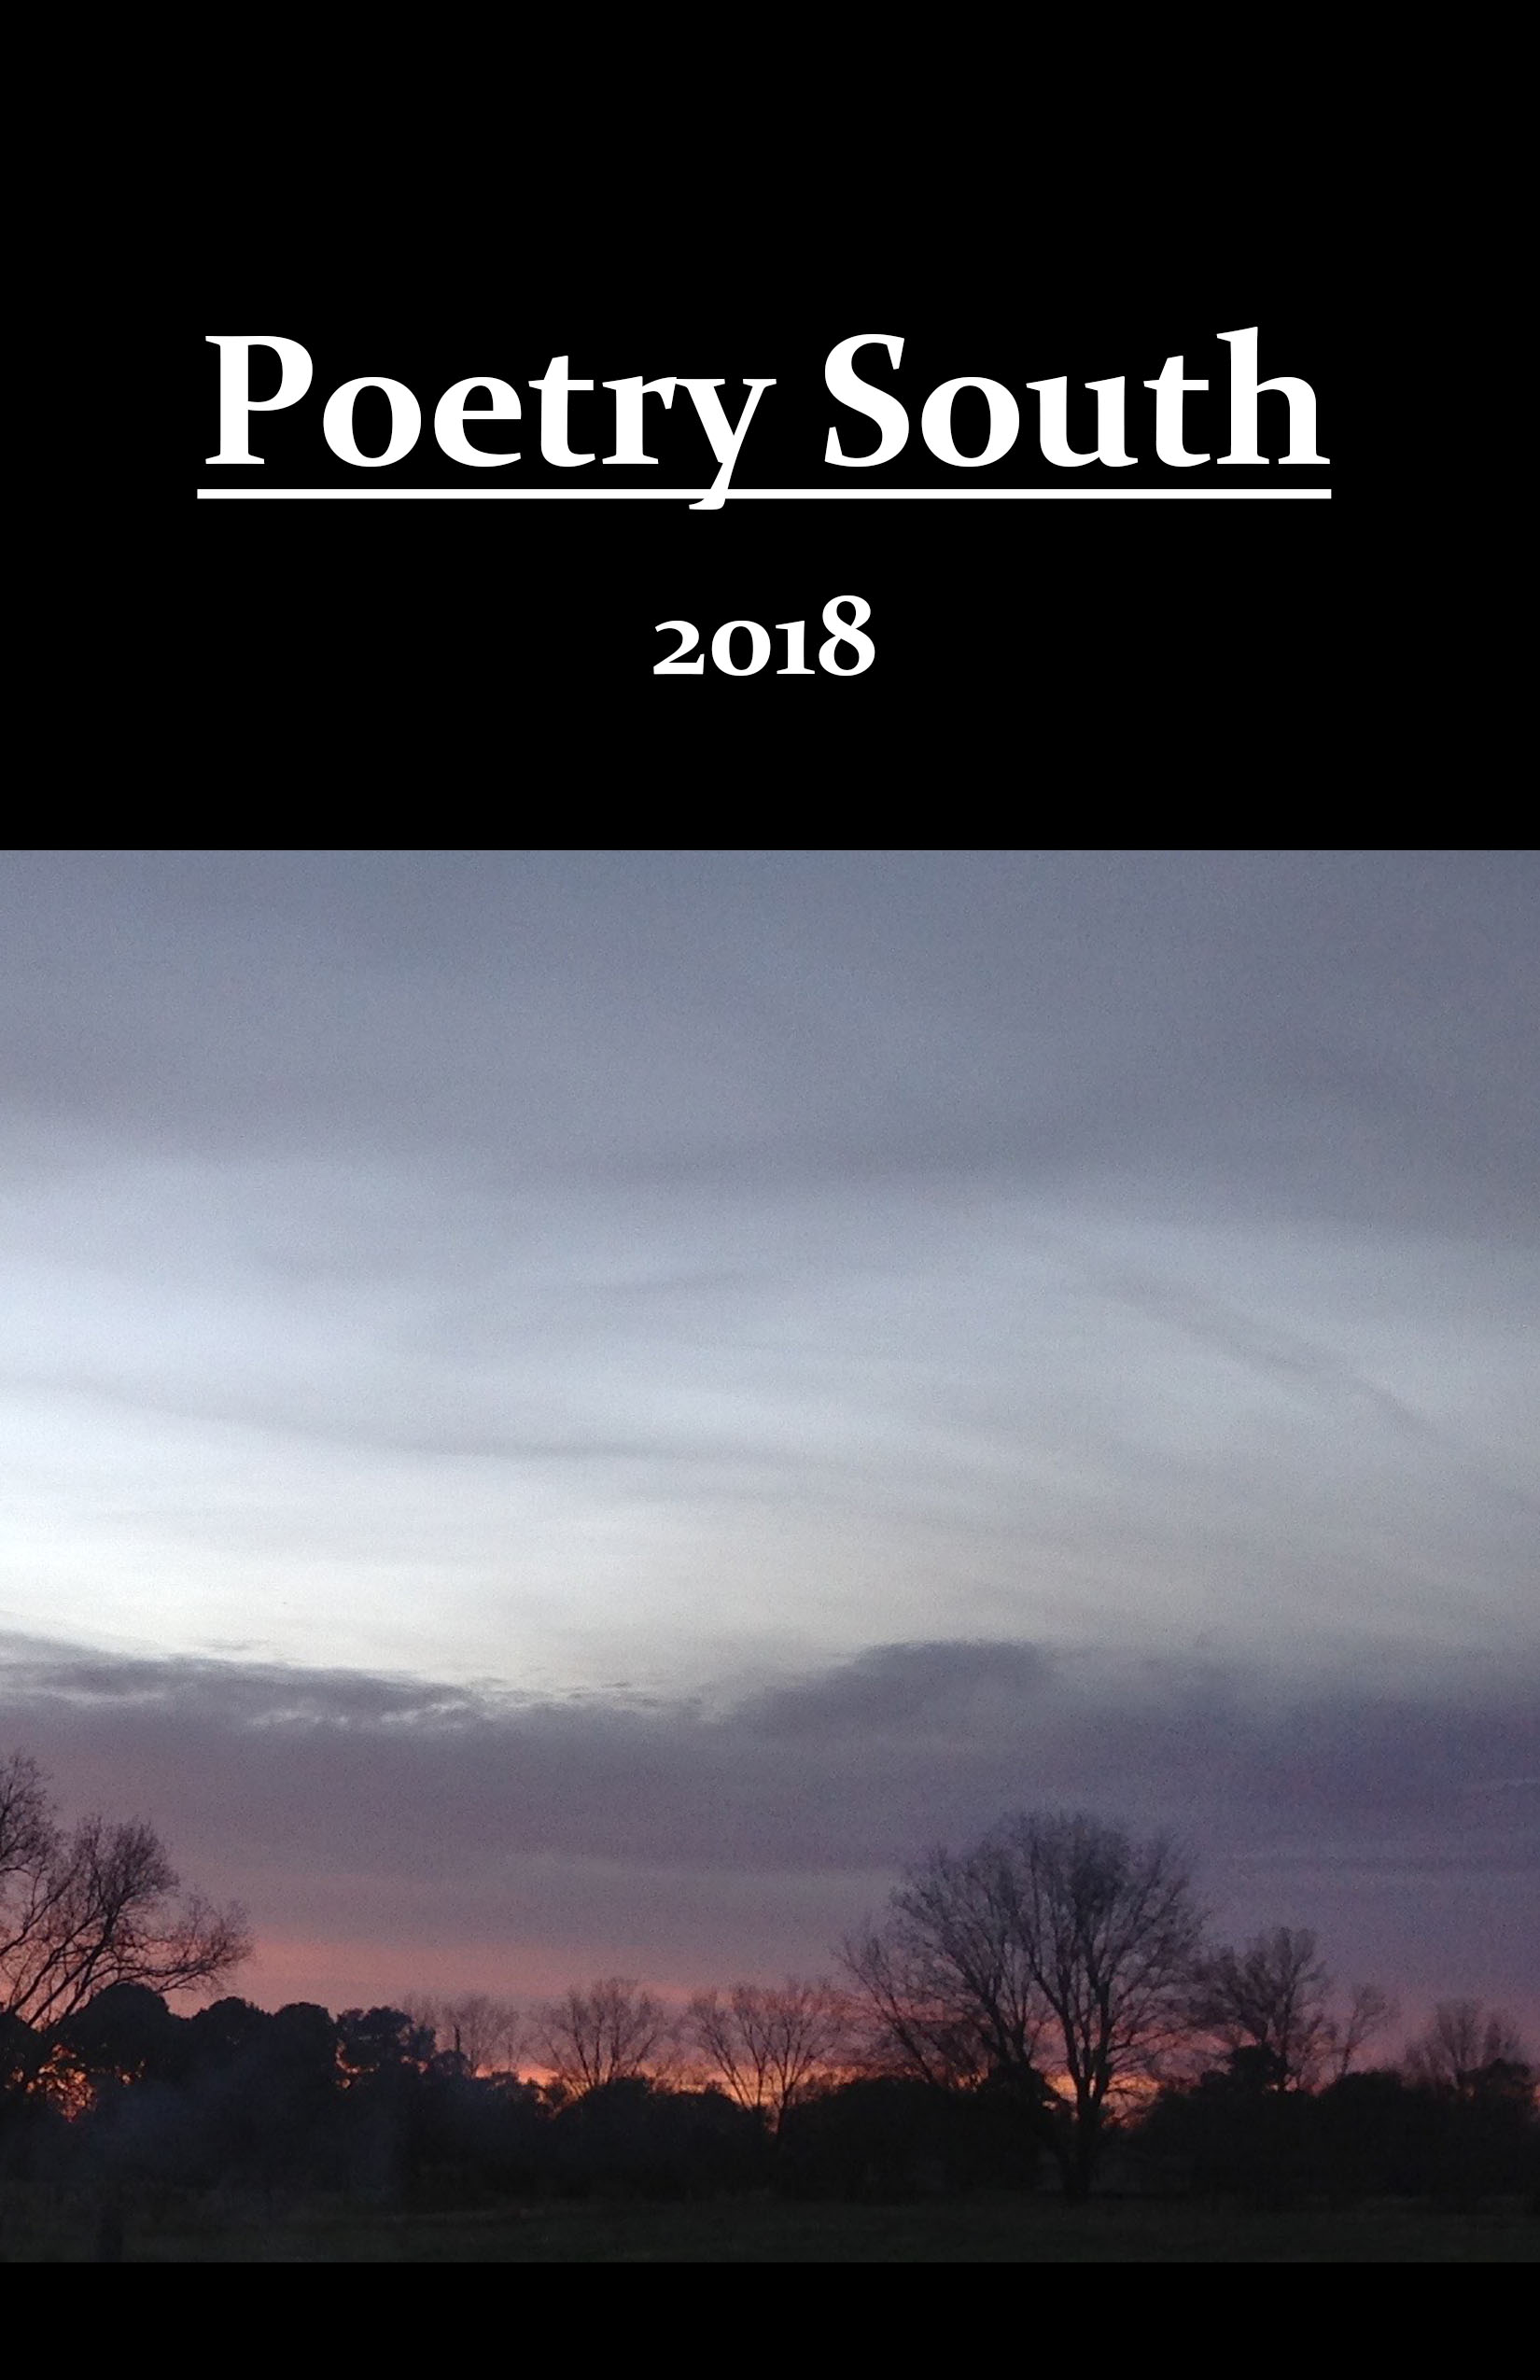 Poetry South 2018 frontcover